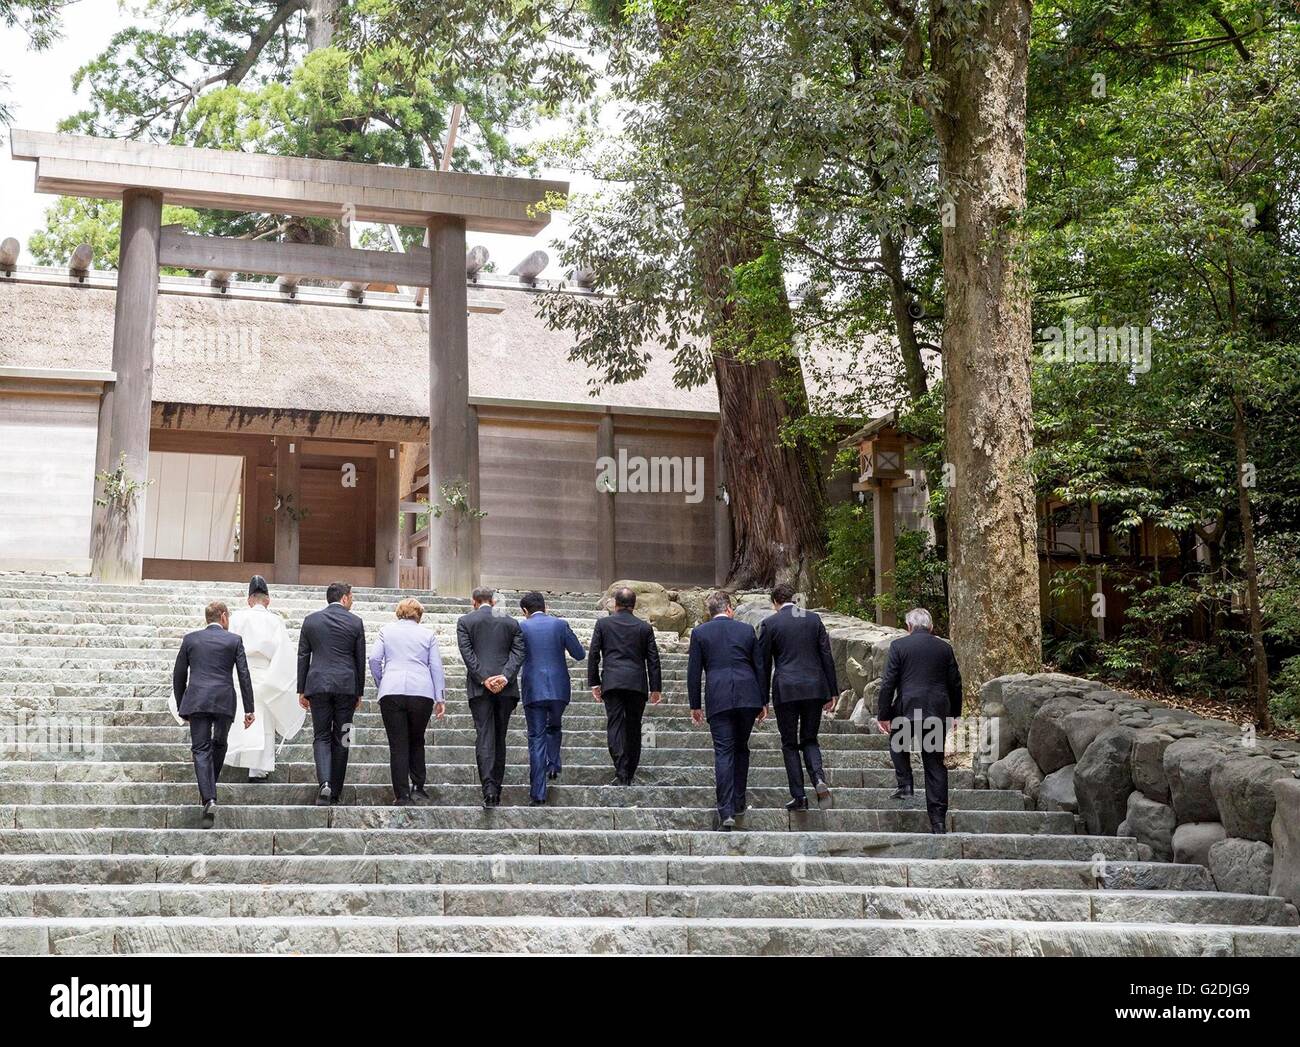 World leaders at the G7 Summit meeting walk up the steps to enter the Mikakiuchi at the Shogu of the Ise-Jingu Shrine May 26, 2016 in Ise, Mie Prefecture, Japan. Stock Photo